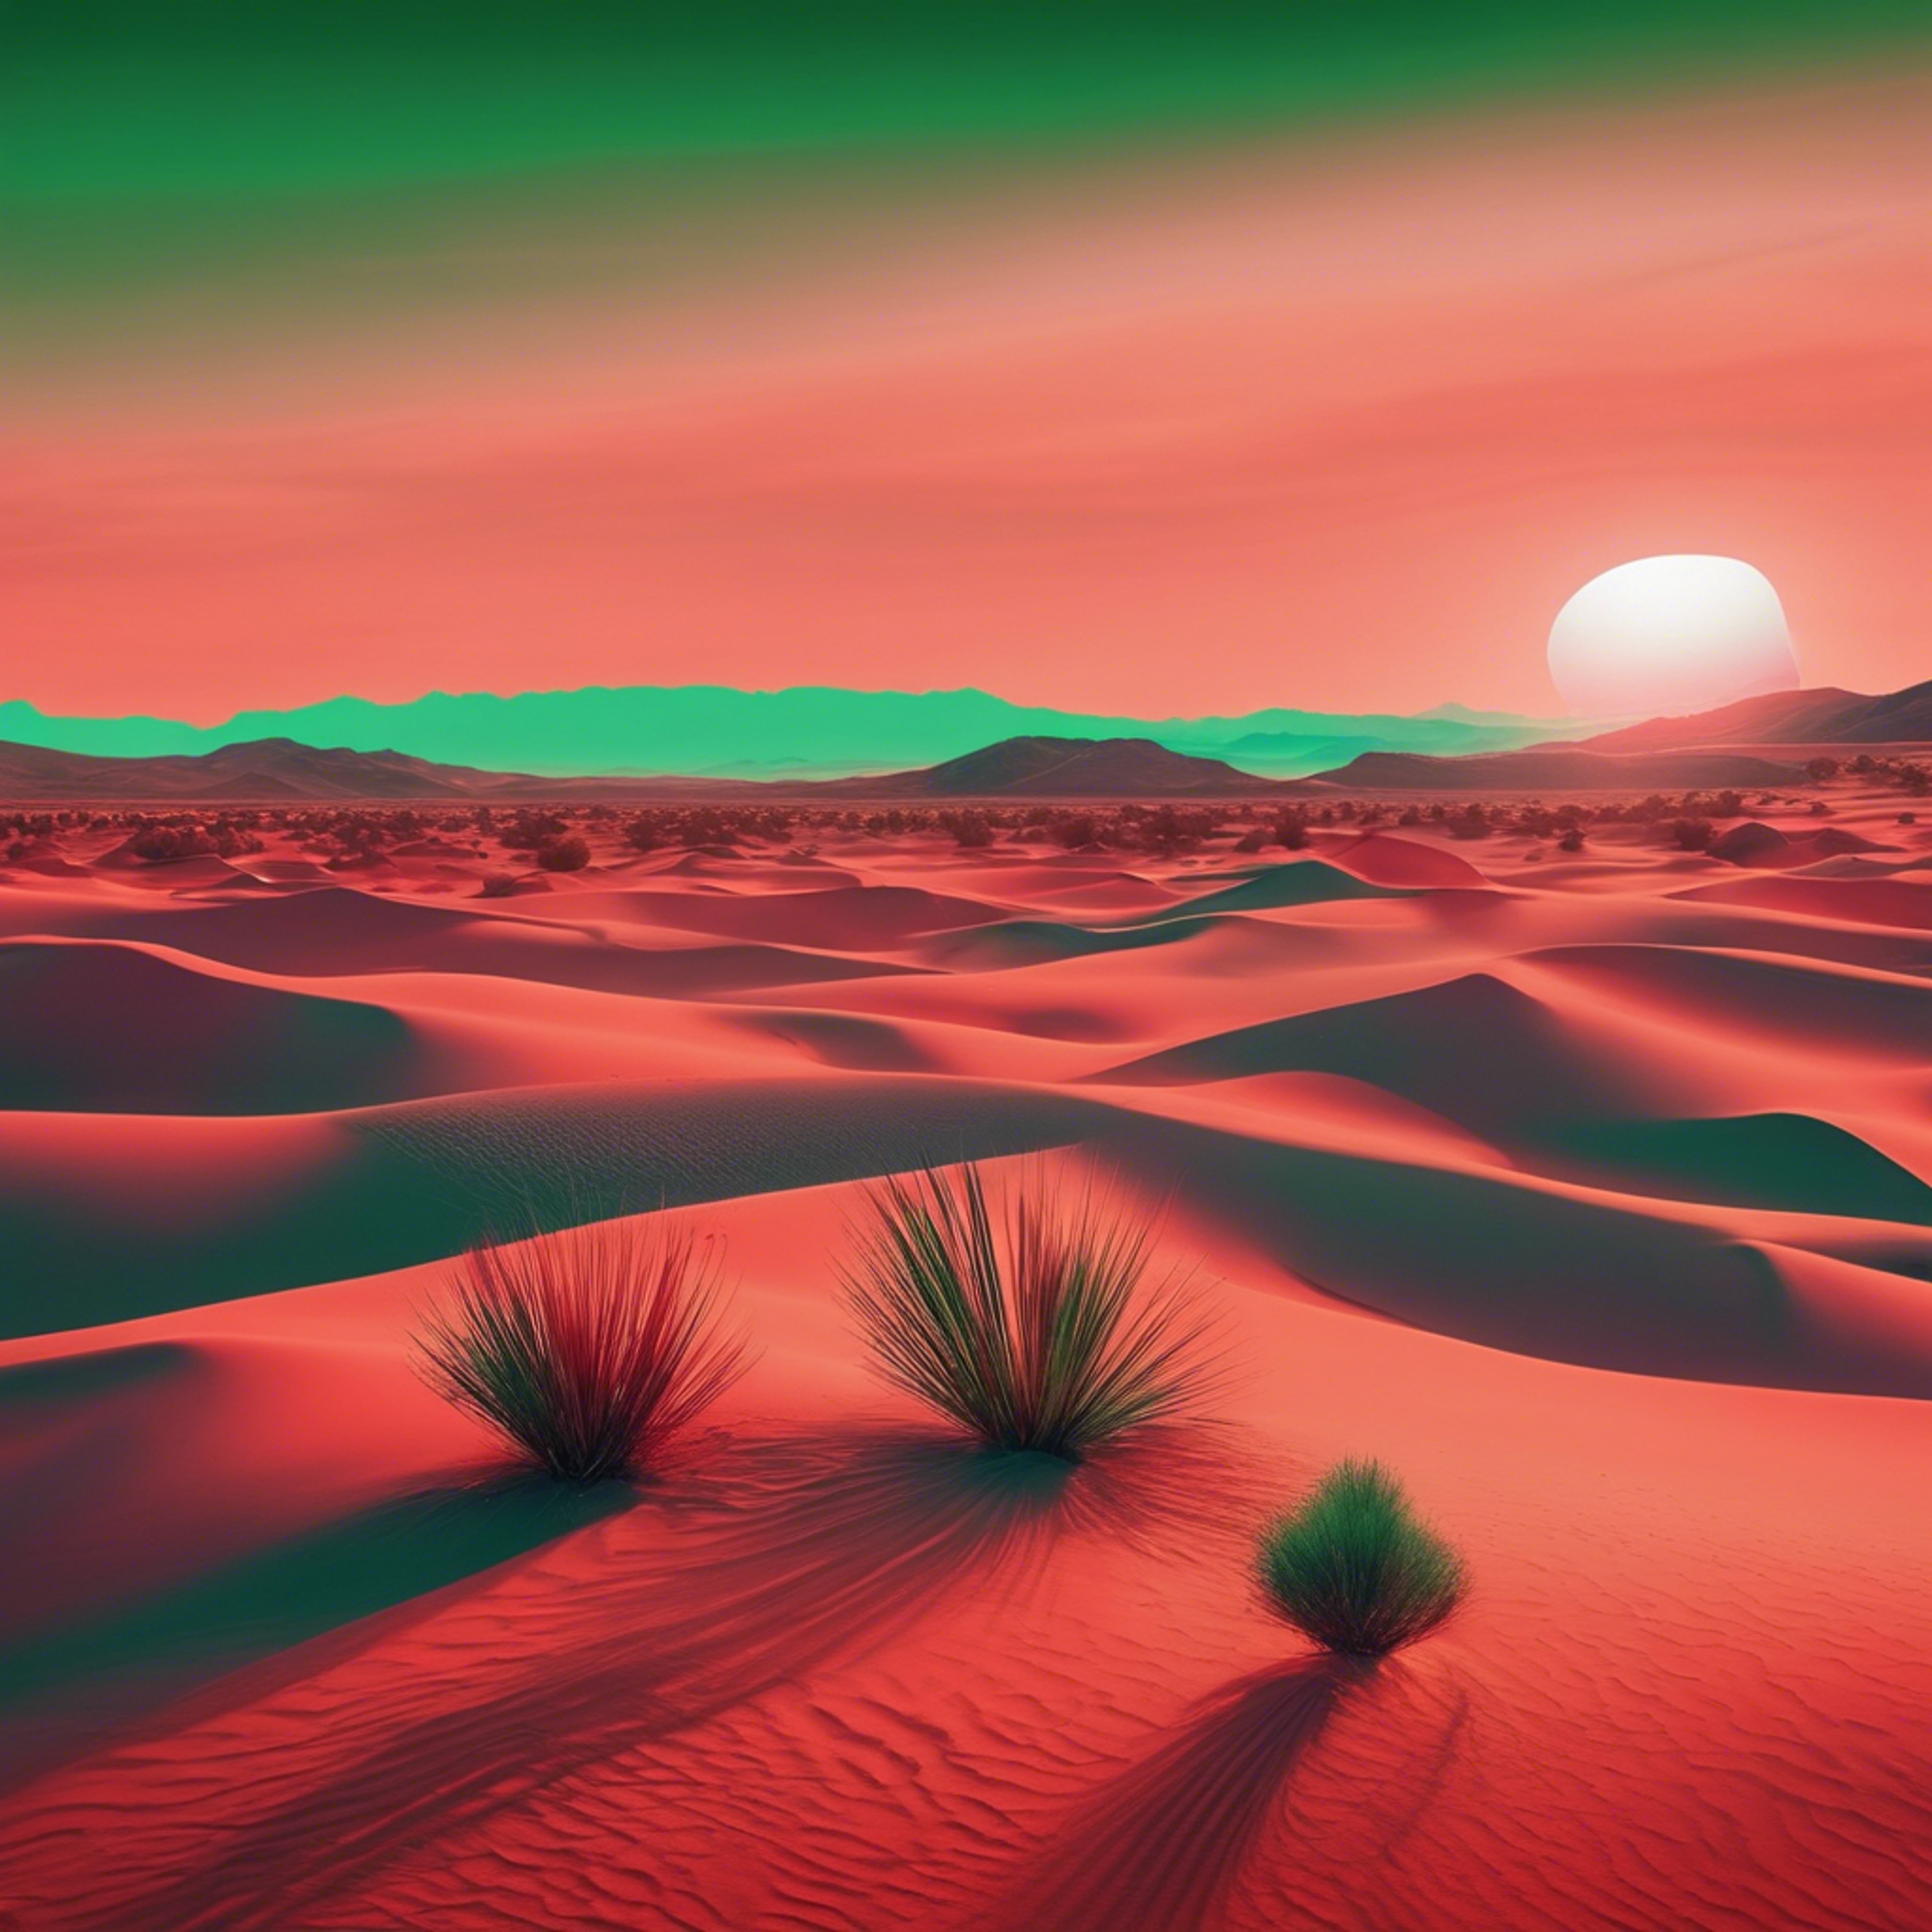 Abstract mirage in red and green, reminiscent of a modern artist's take on a desert sunset壁紙[3a4ec3a043b54638a7ad]